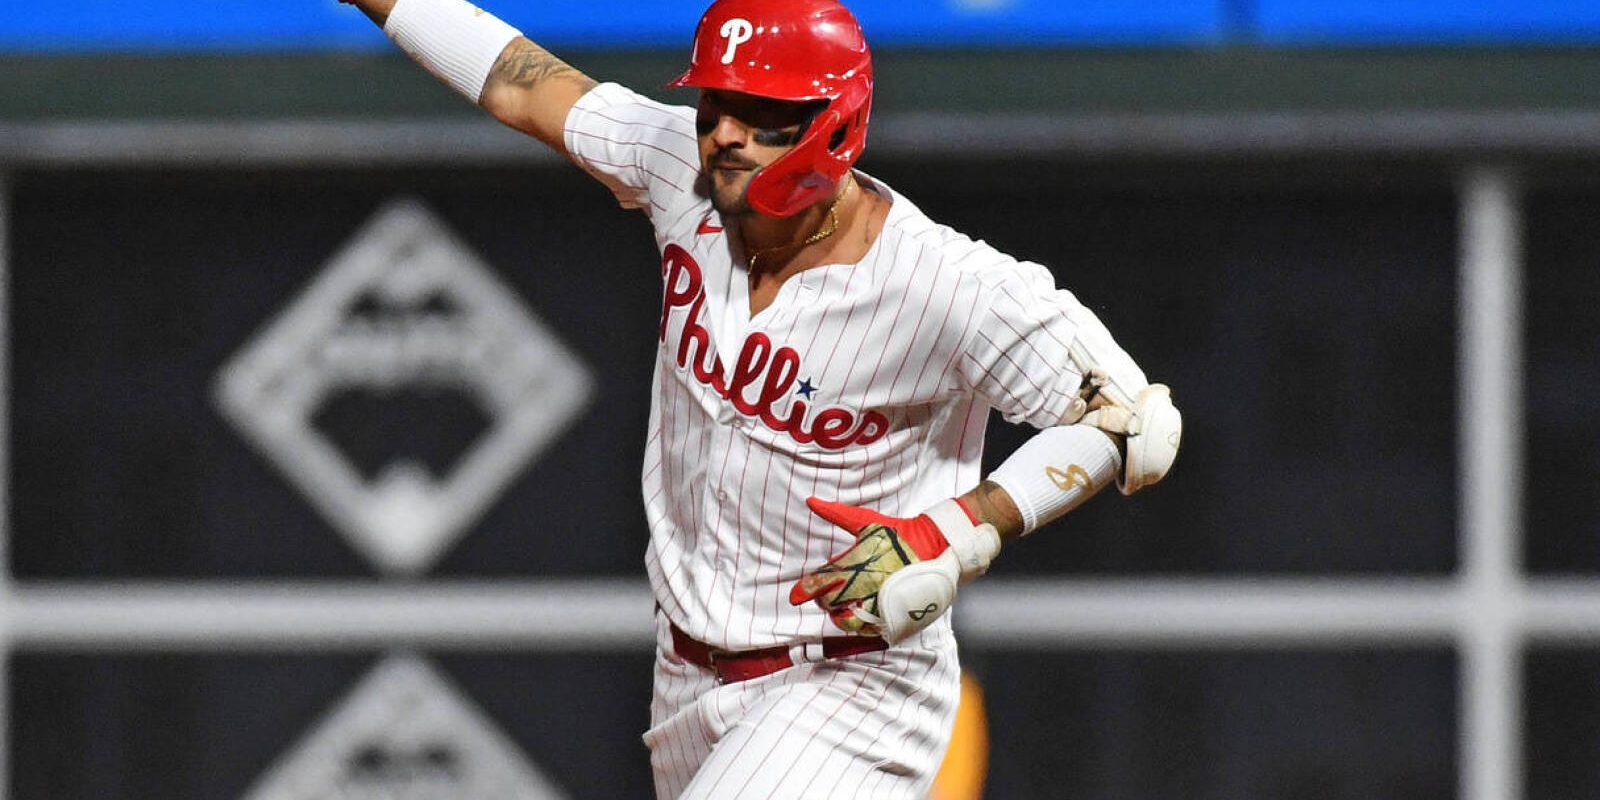 Oct 11, 2023; Philadelphia, Pennsylvania, USA; Philadelphia Phillies right fielder Nick Castellanos (8) hits a solo home run during the eighth inning against the Atlanta Braves in game three of the NLDS for the 2023 MLB playoffs at Citizens Bank Park. Mandatory Credit: Eric Hartline-USA TODAY Sports